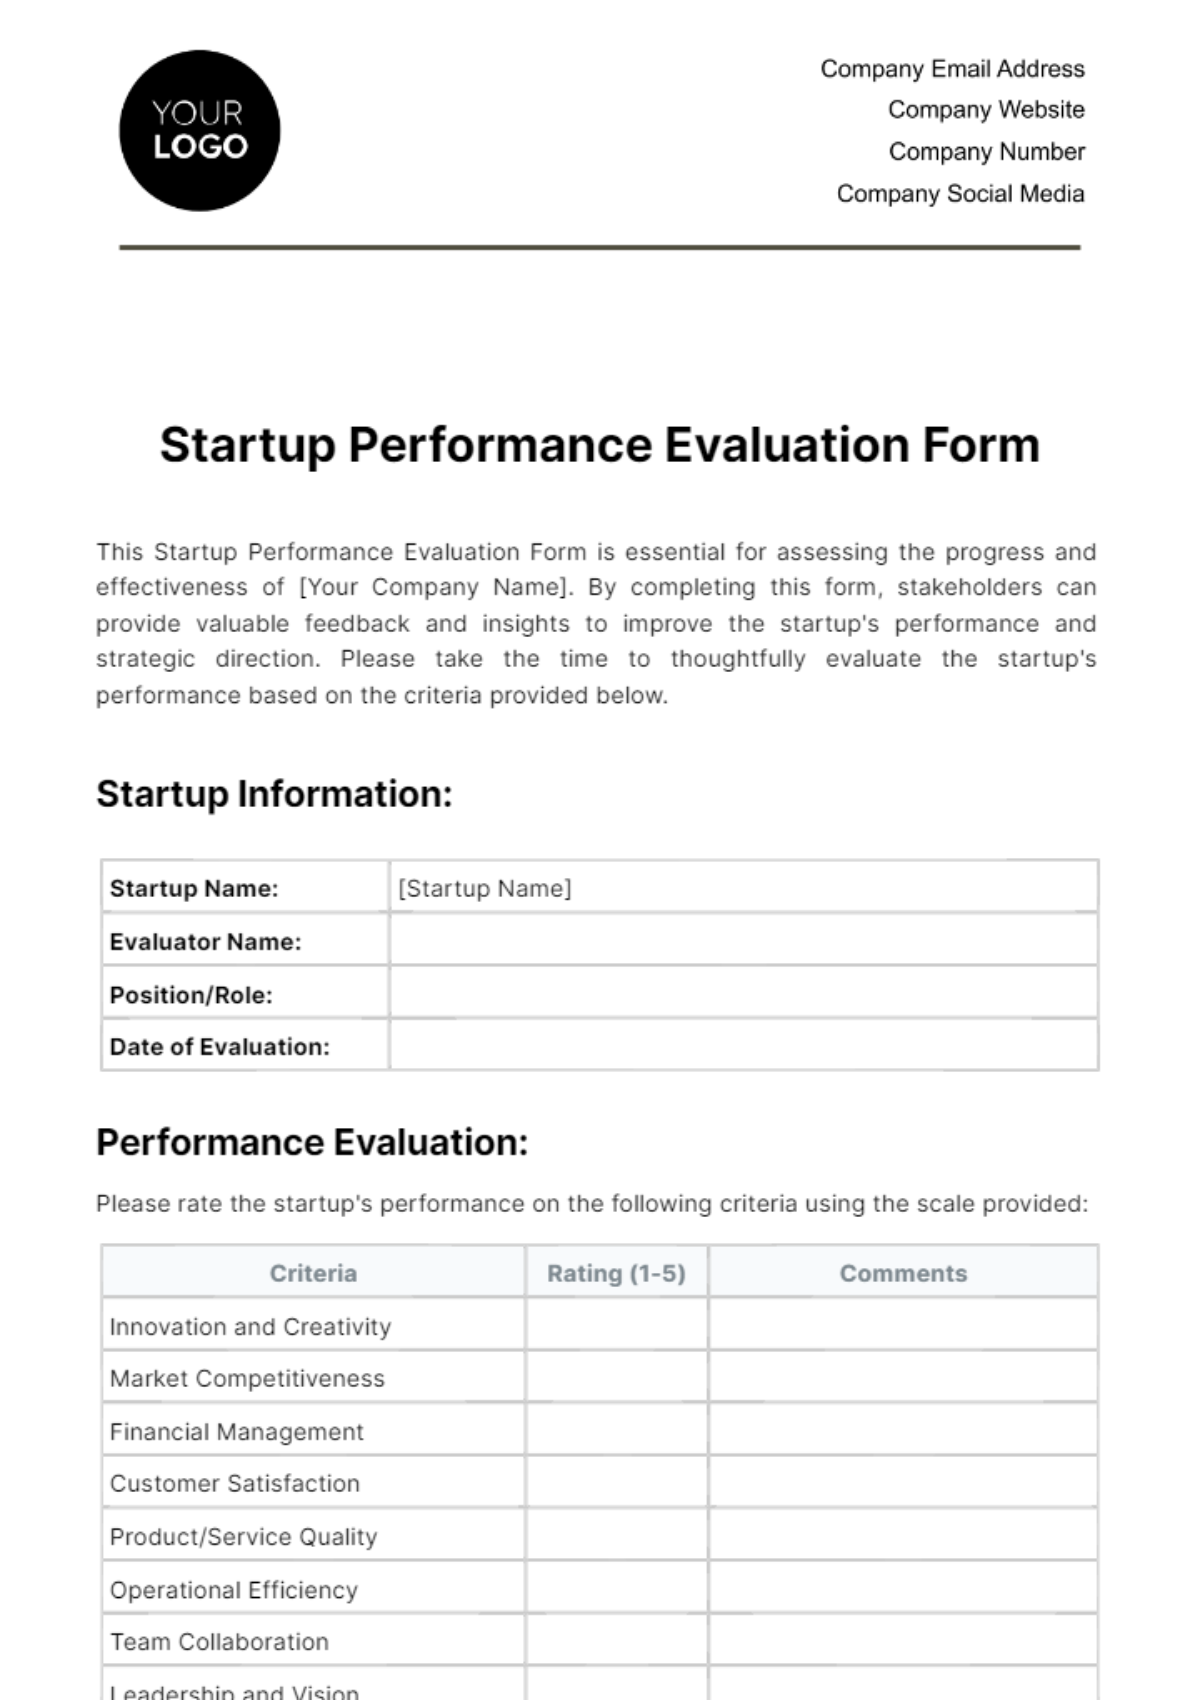 Startup Performance Evaluation Form Template